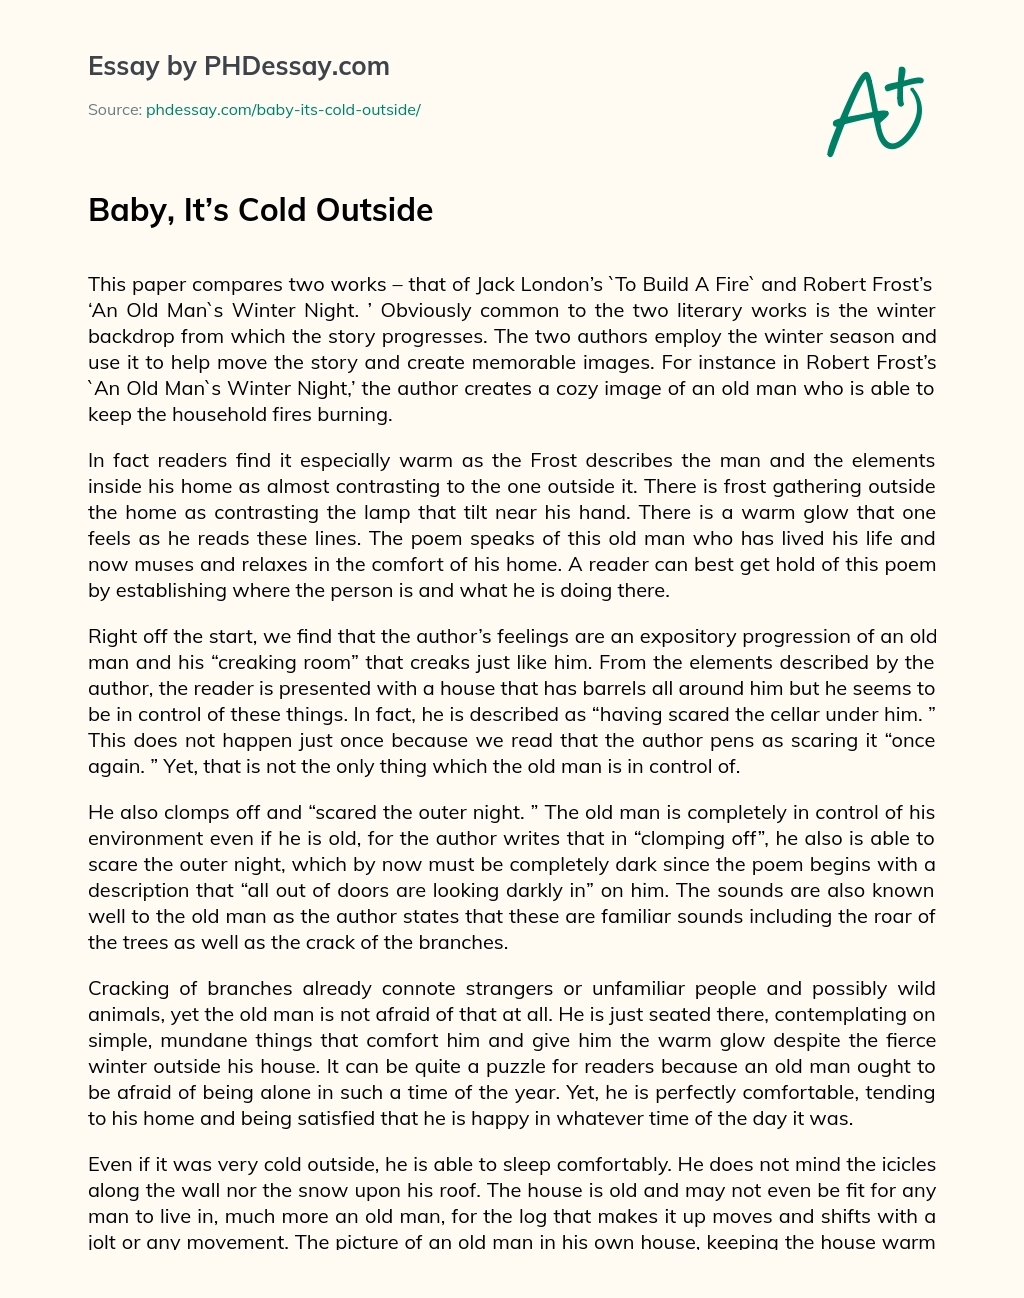 Baby, It’s Cold Outside essay